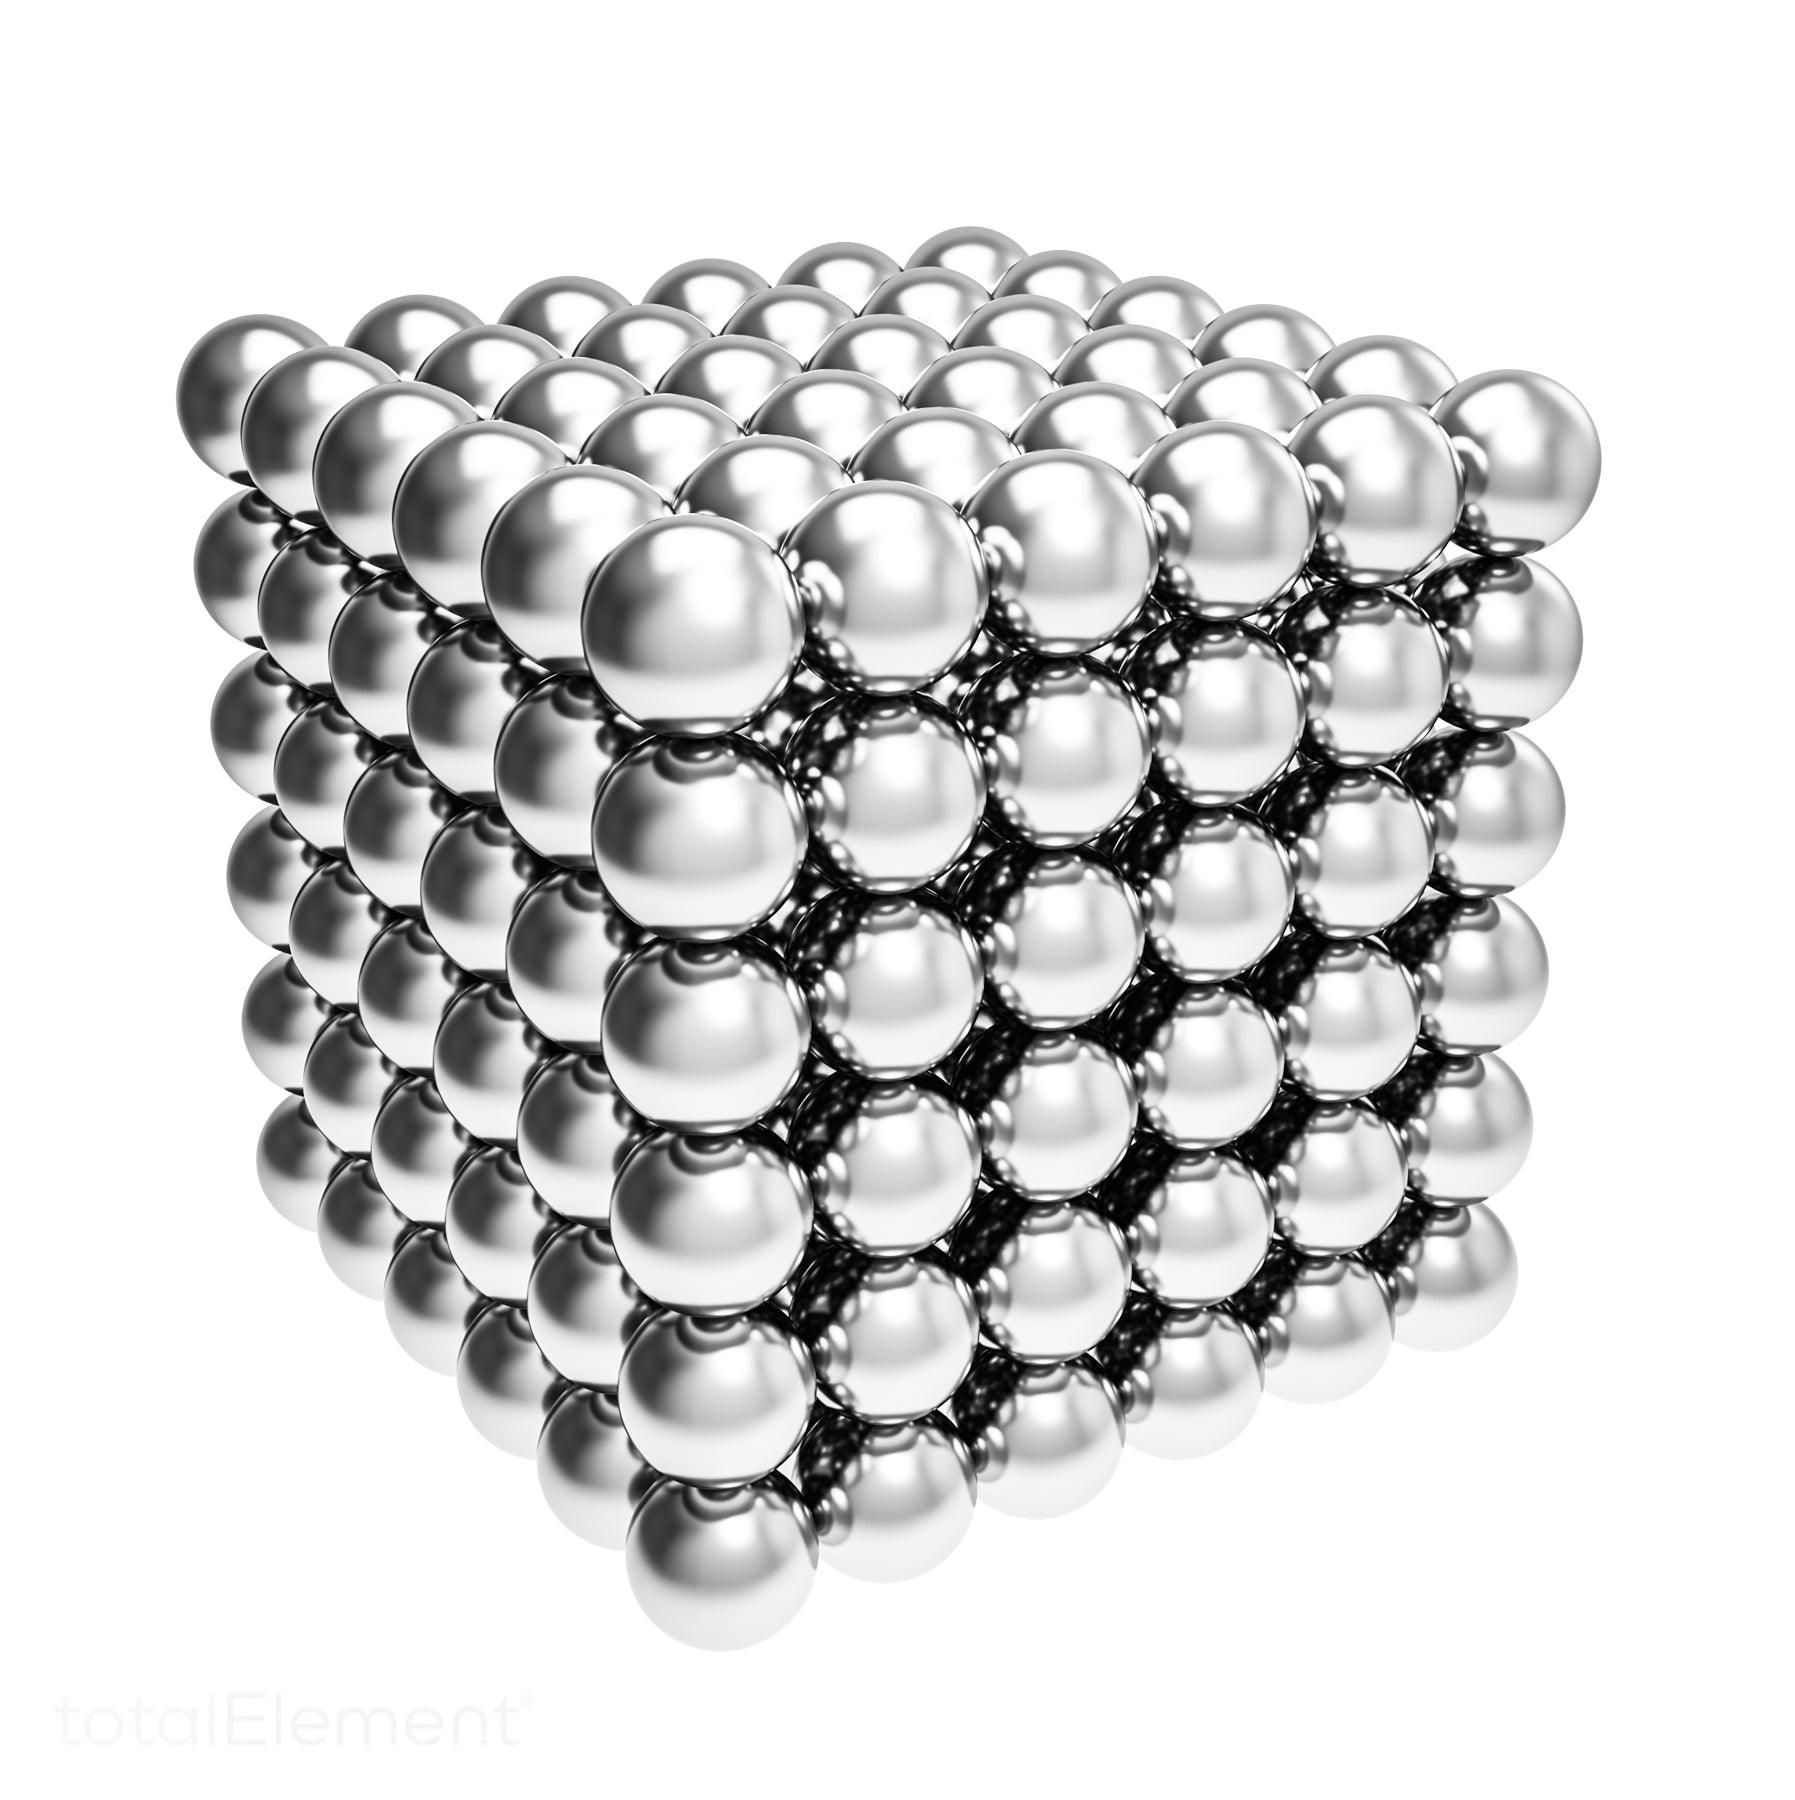 5mm Neodymium Rare Earth Sphere/Ball Magnets (216 Pack) Sale | totalElement